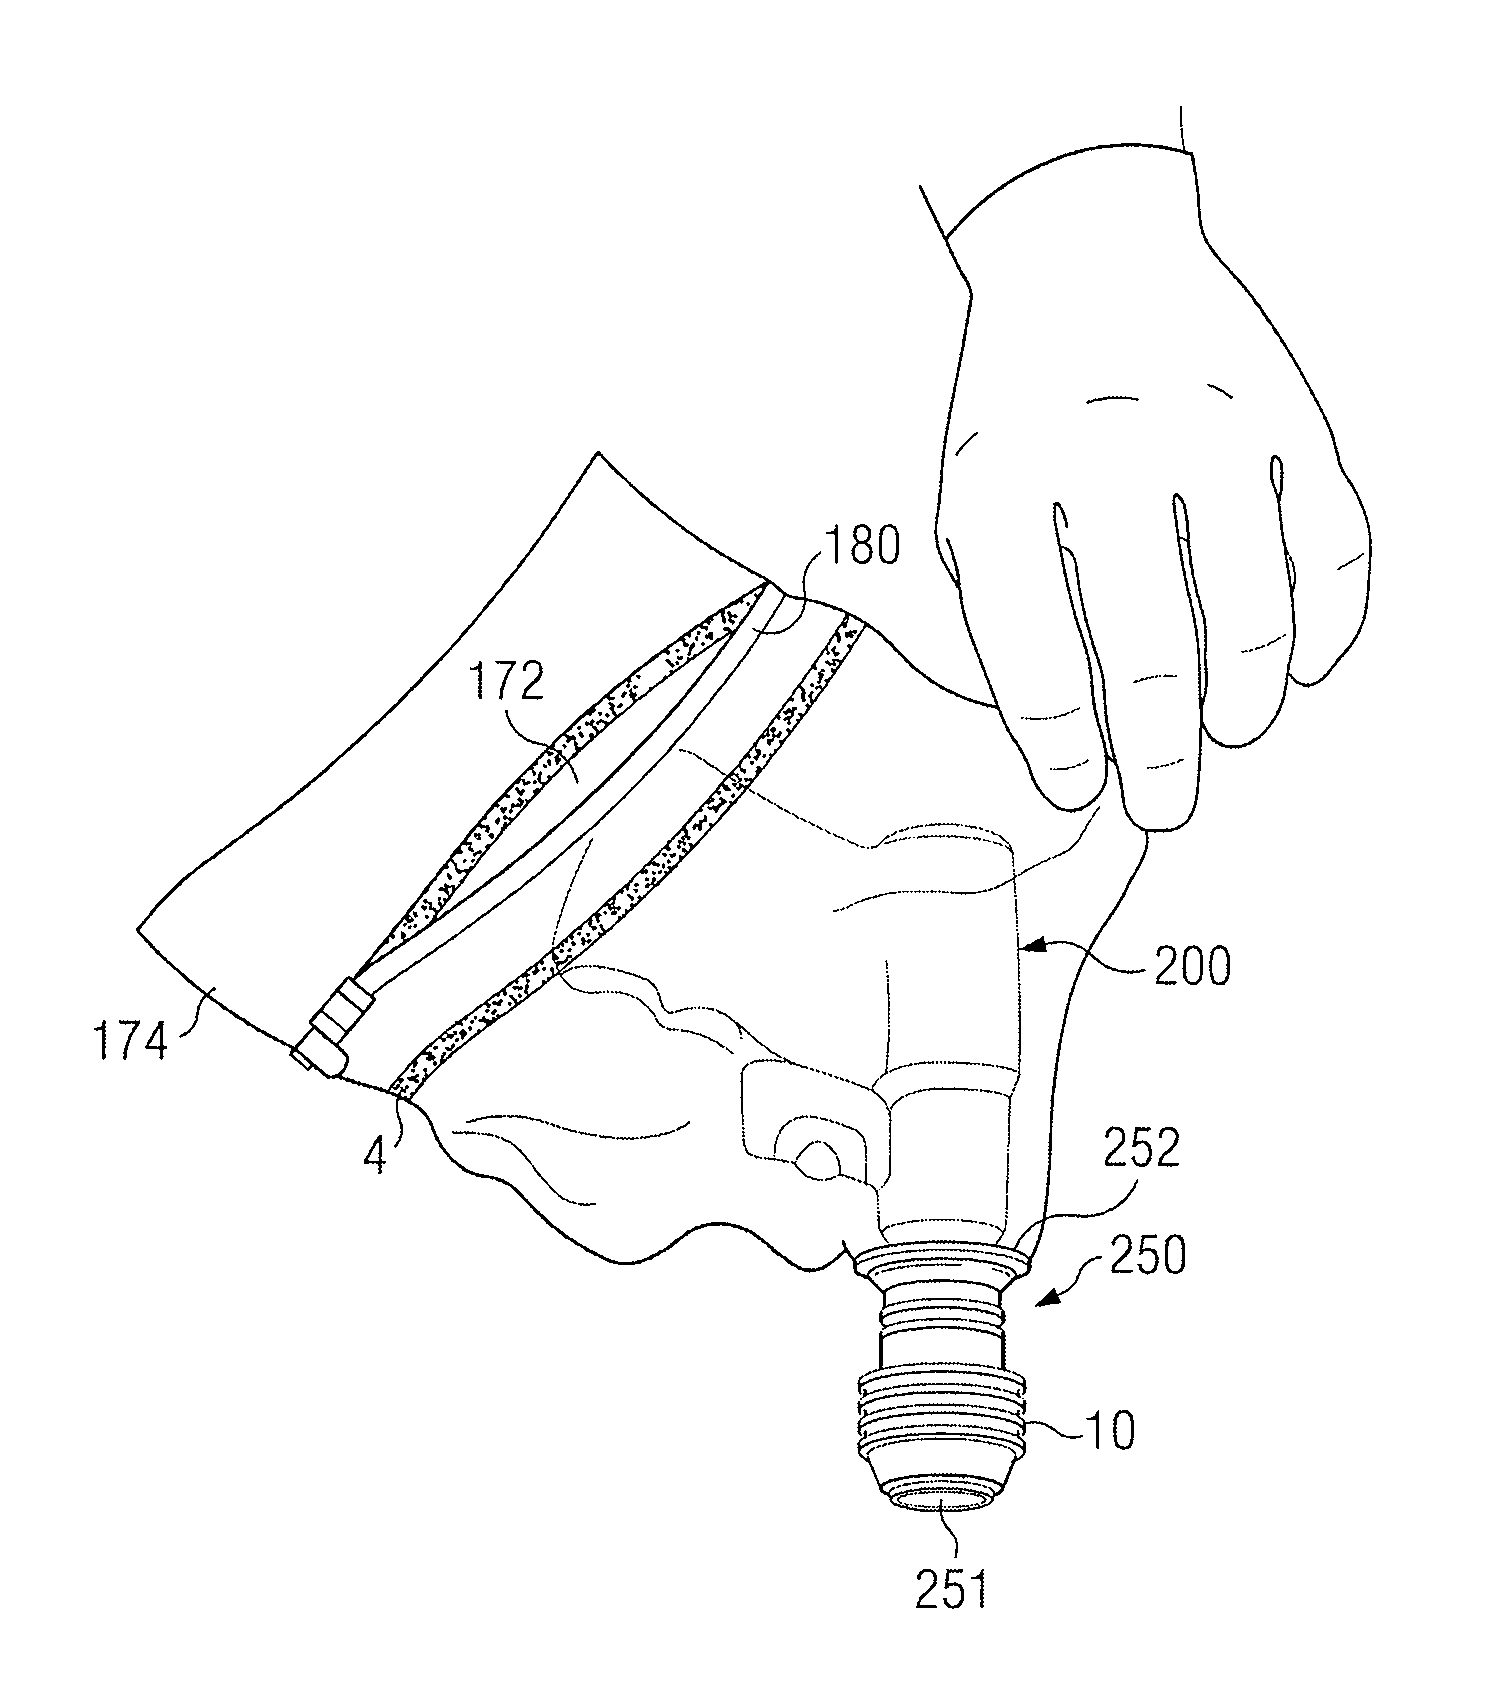 Assemblies for coupling intraosseous (IO) devices to powered drivers